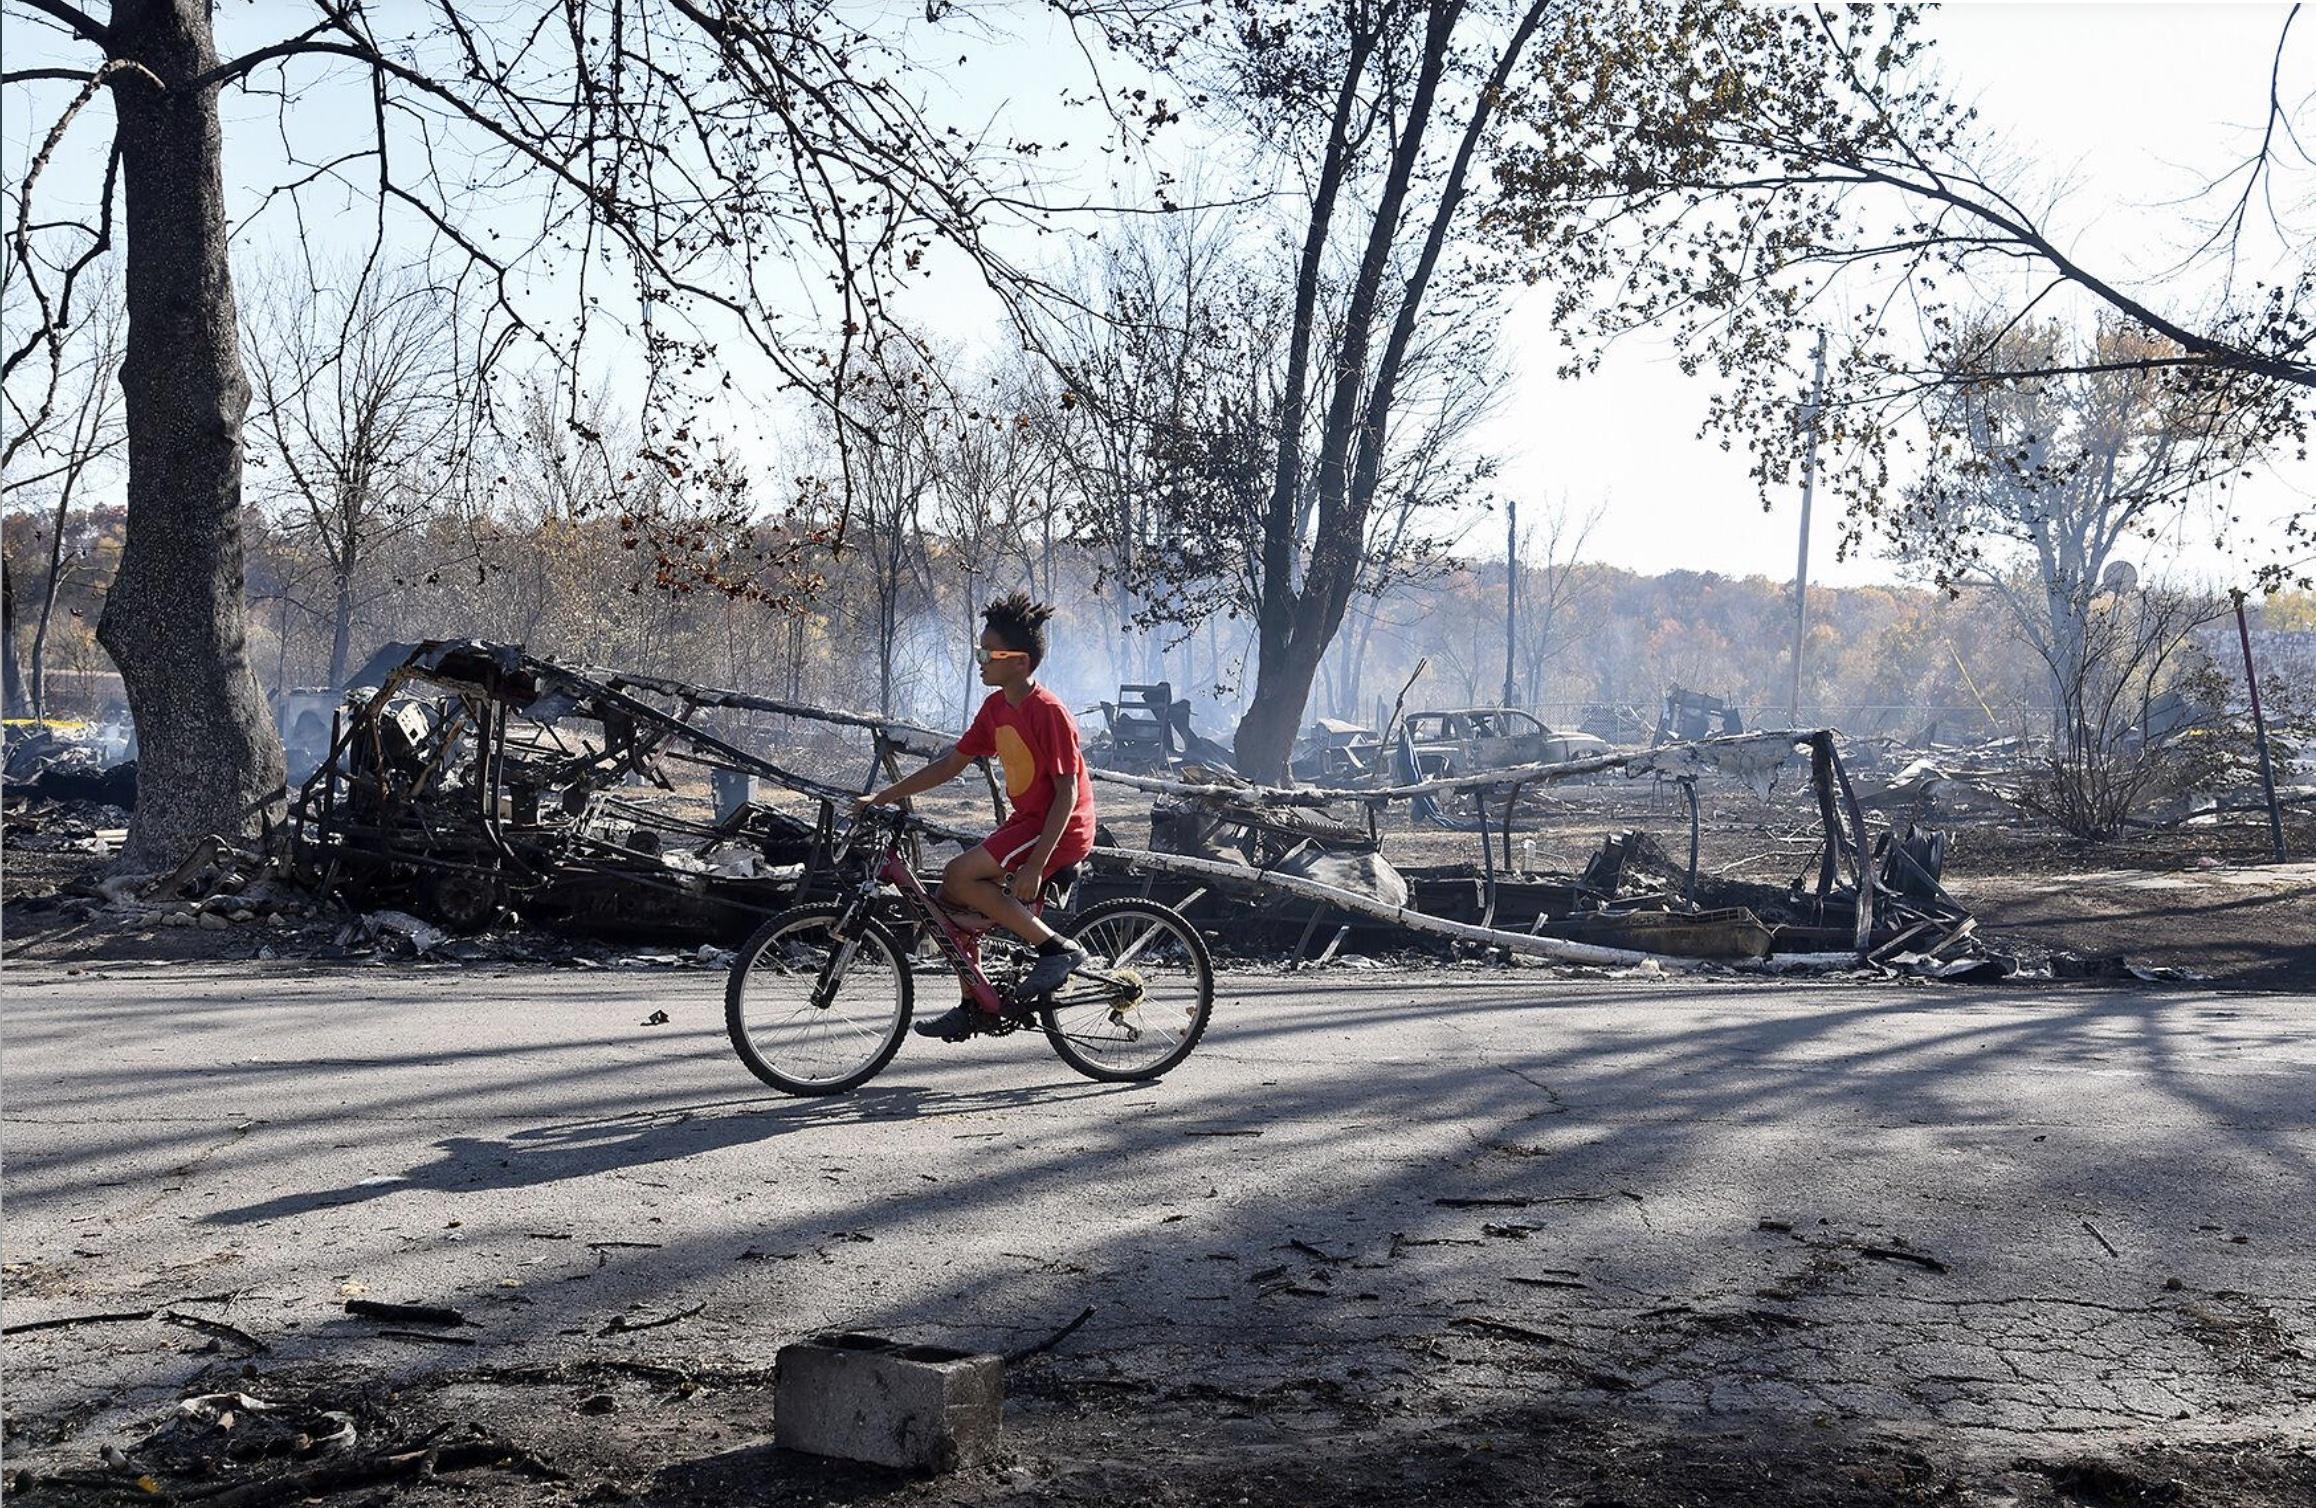 No relief:  Lack of government help leaves fire survivors relying on donations